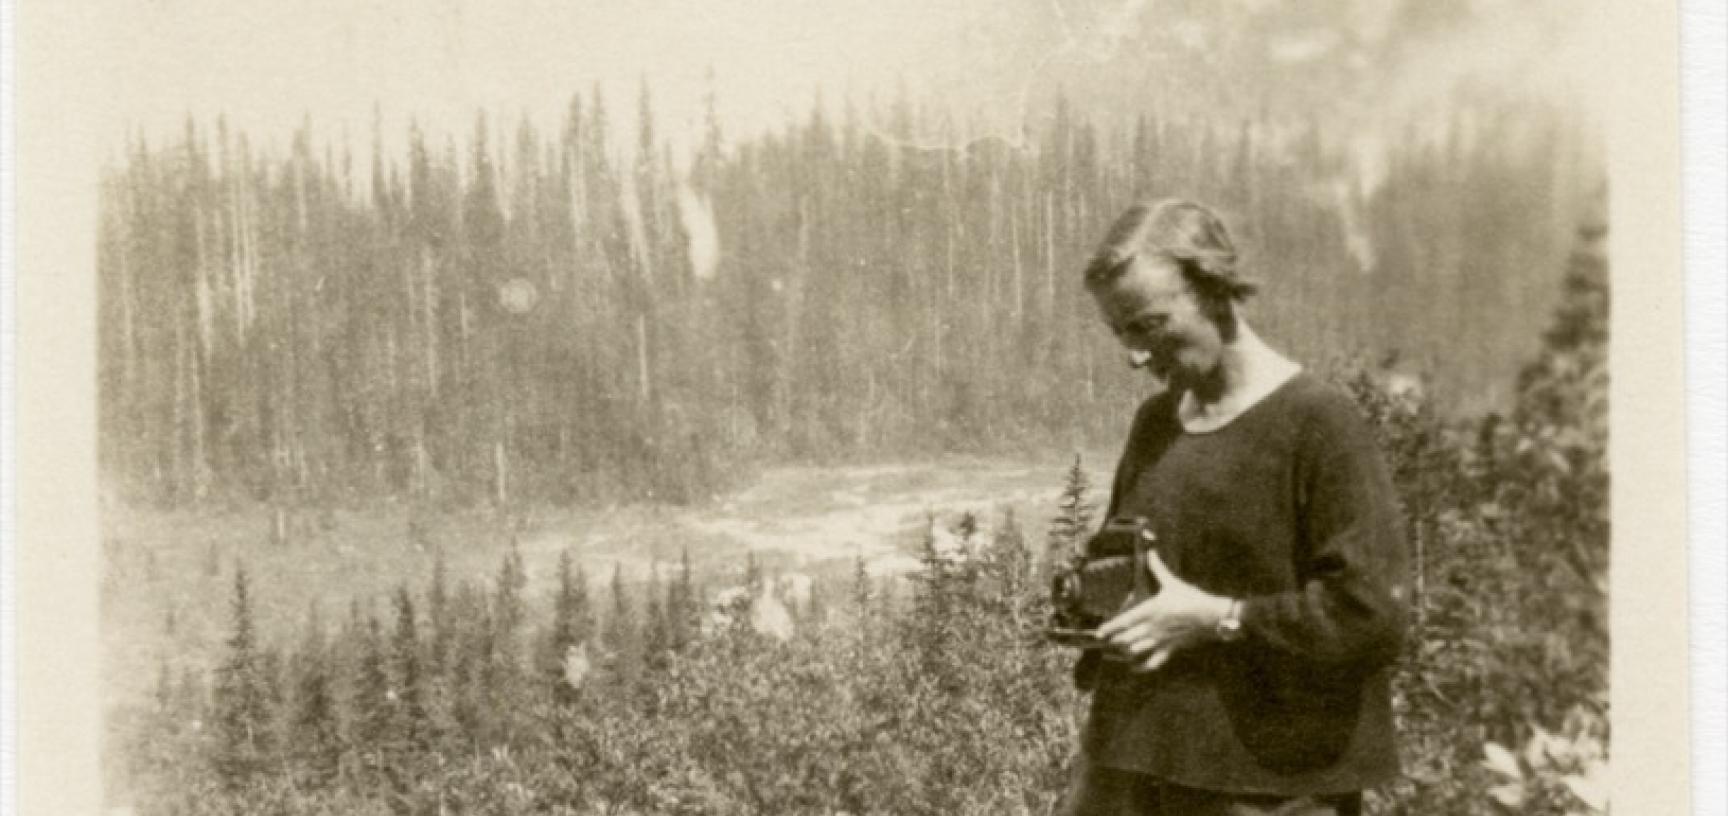 Old photo of a woman taking a photo of a wooded landscape